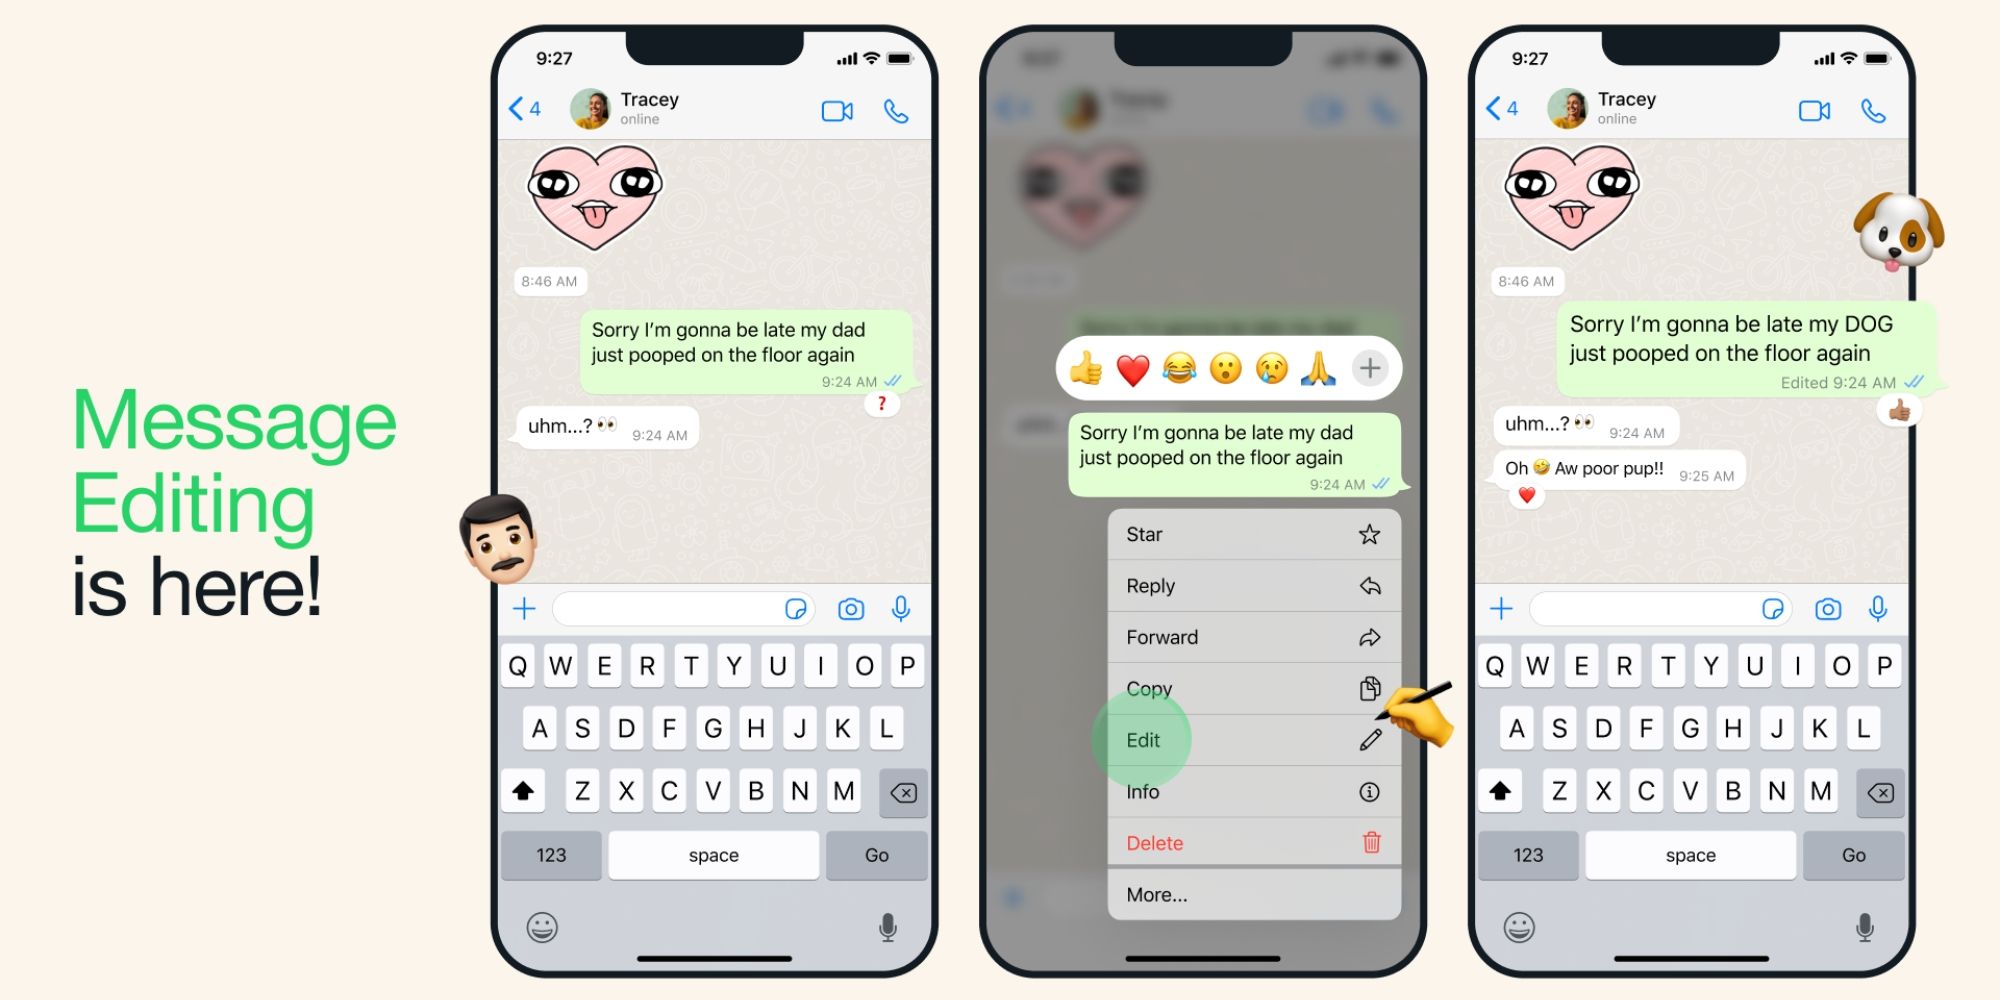 Screenshots of the WhatsApp Message Editing feature